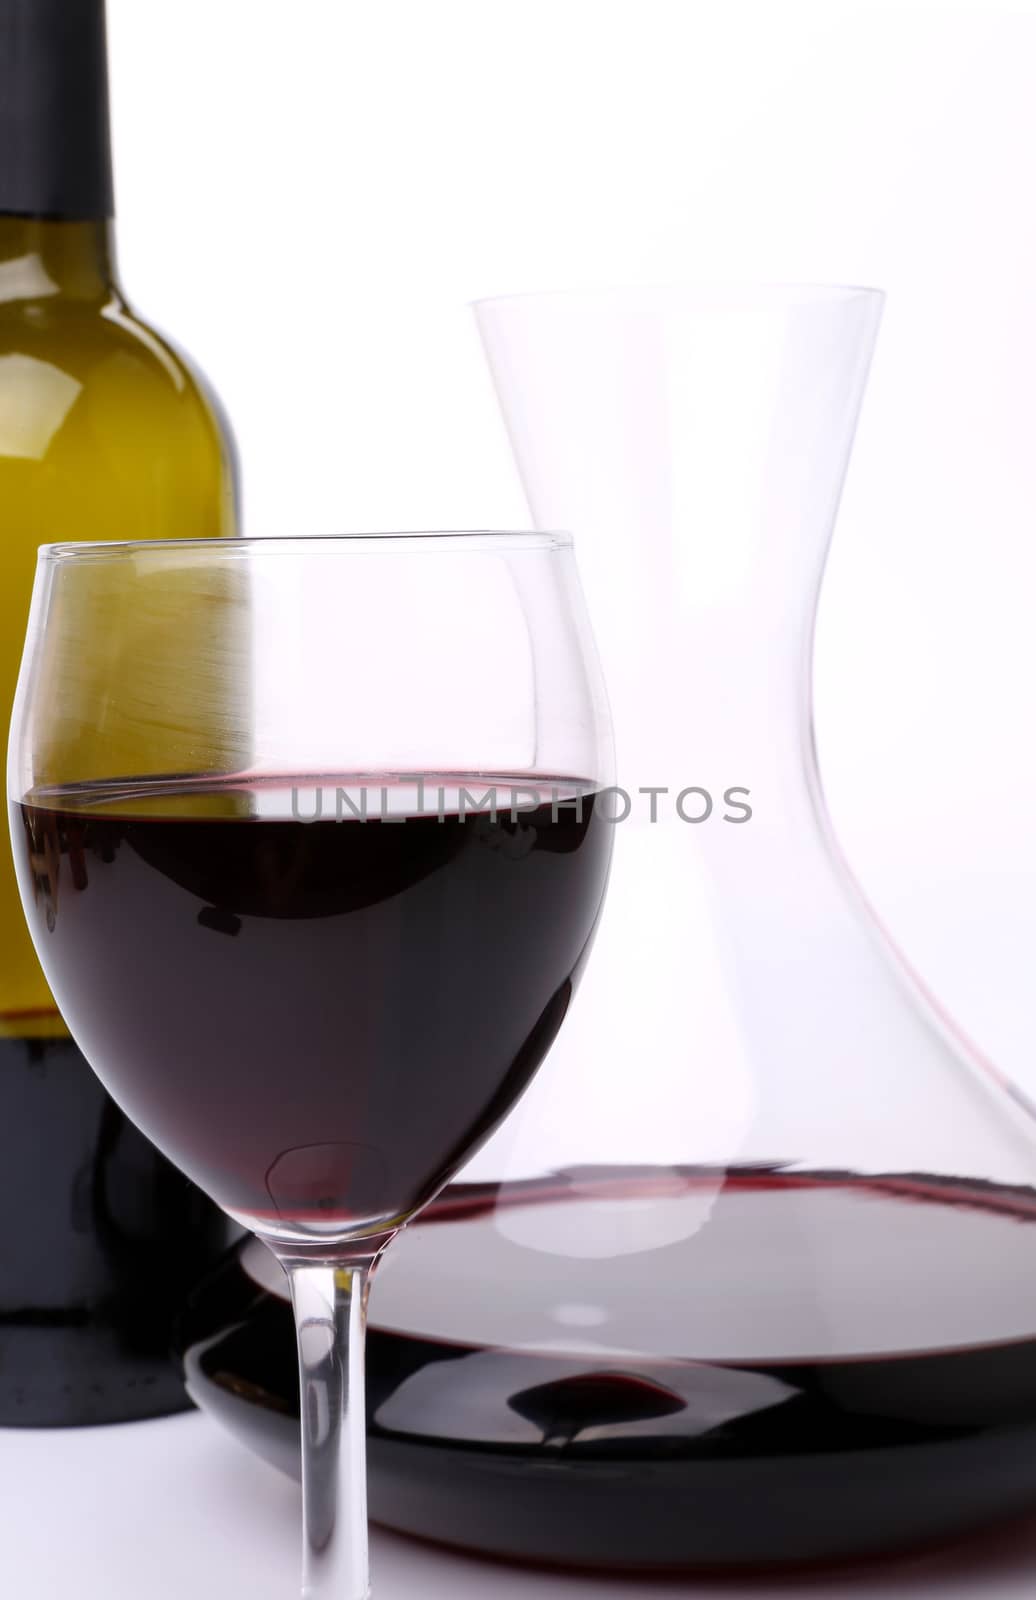 Decanter, bottle and glass of wine close-up by indigolotos